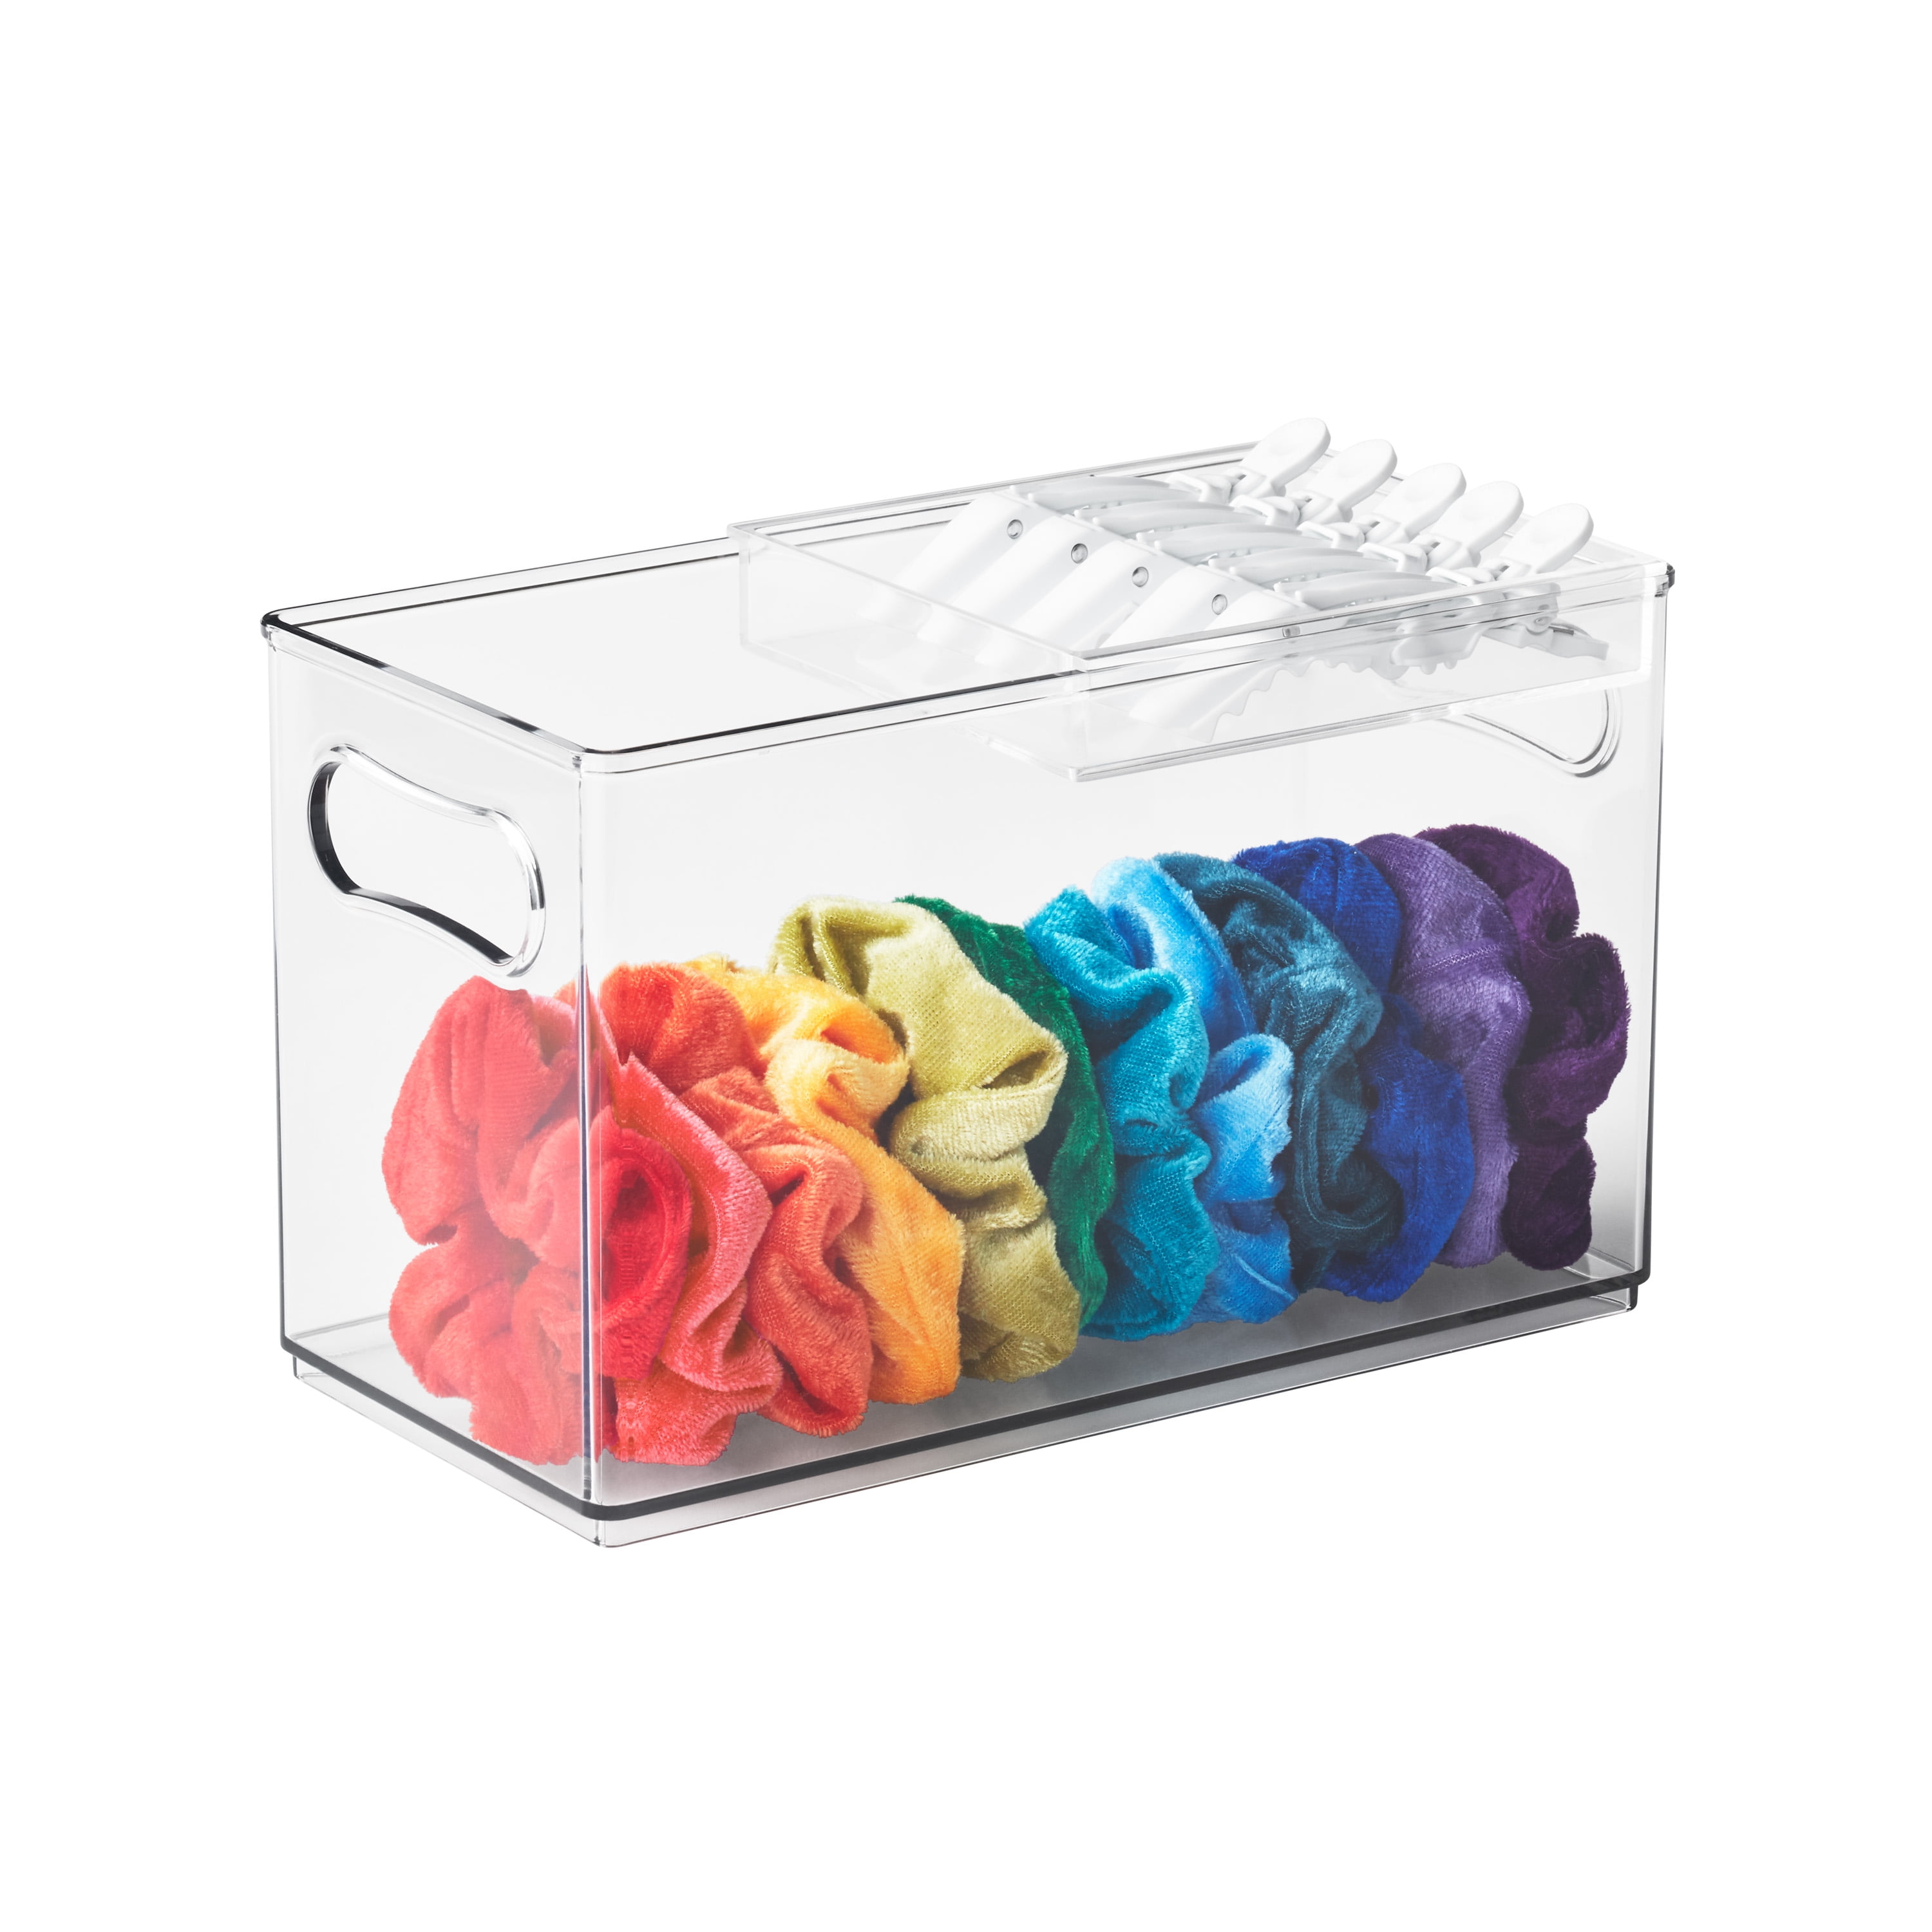 Sterilite 6.25x6.25x15 In Narrow Storage Bin with Carry Handles, Clear (8  Pack), 1 Piece - Kroger